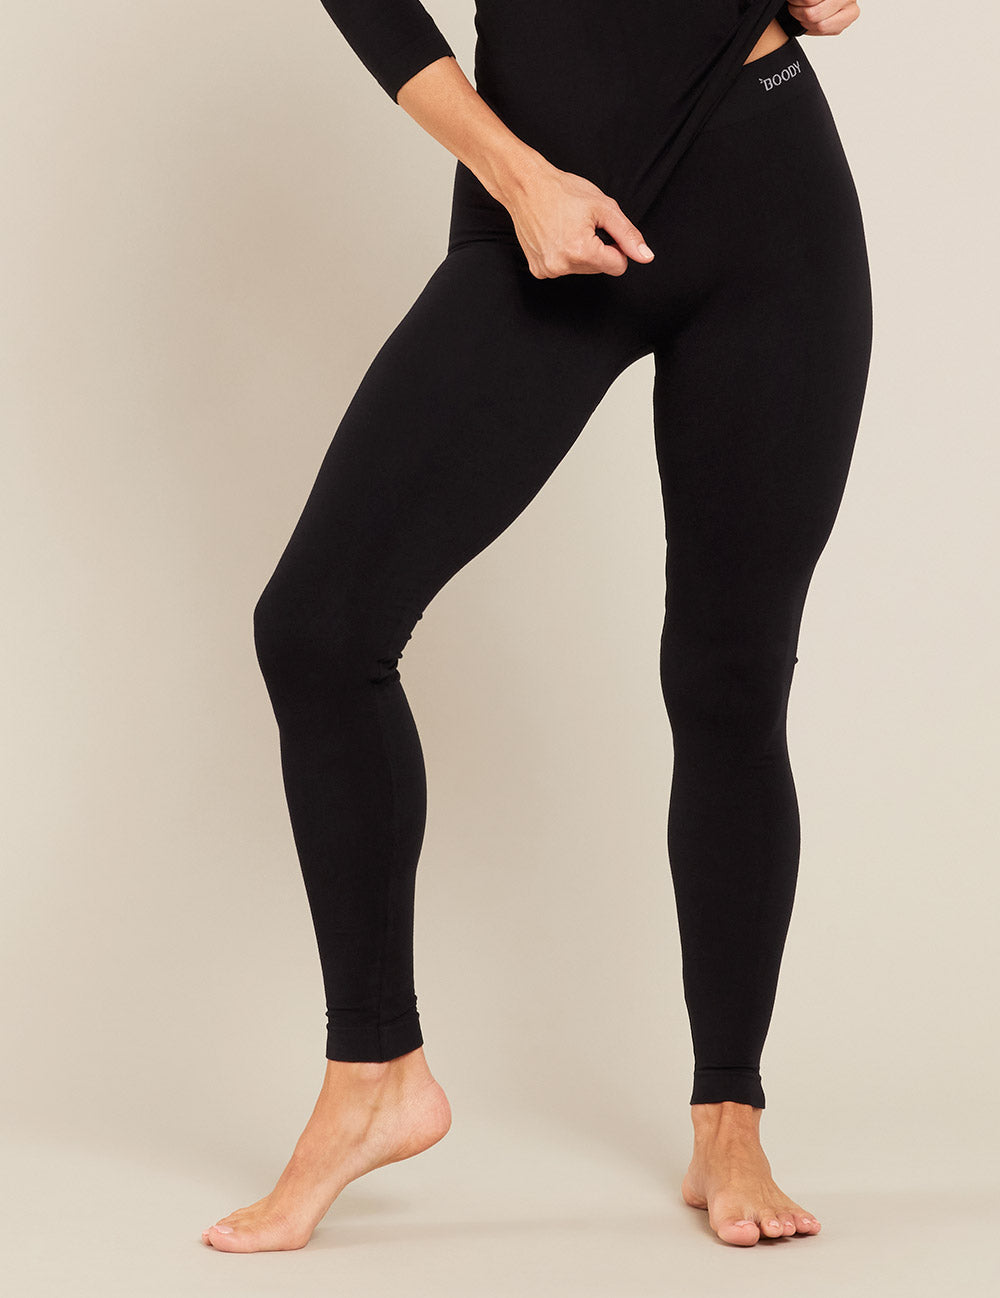 Stay Stylish and Active in Black Camo Printed Leggings with Active Wear  Compression by Twisted420Glass - Perfect for Workouts and Everyday